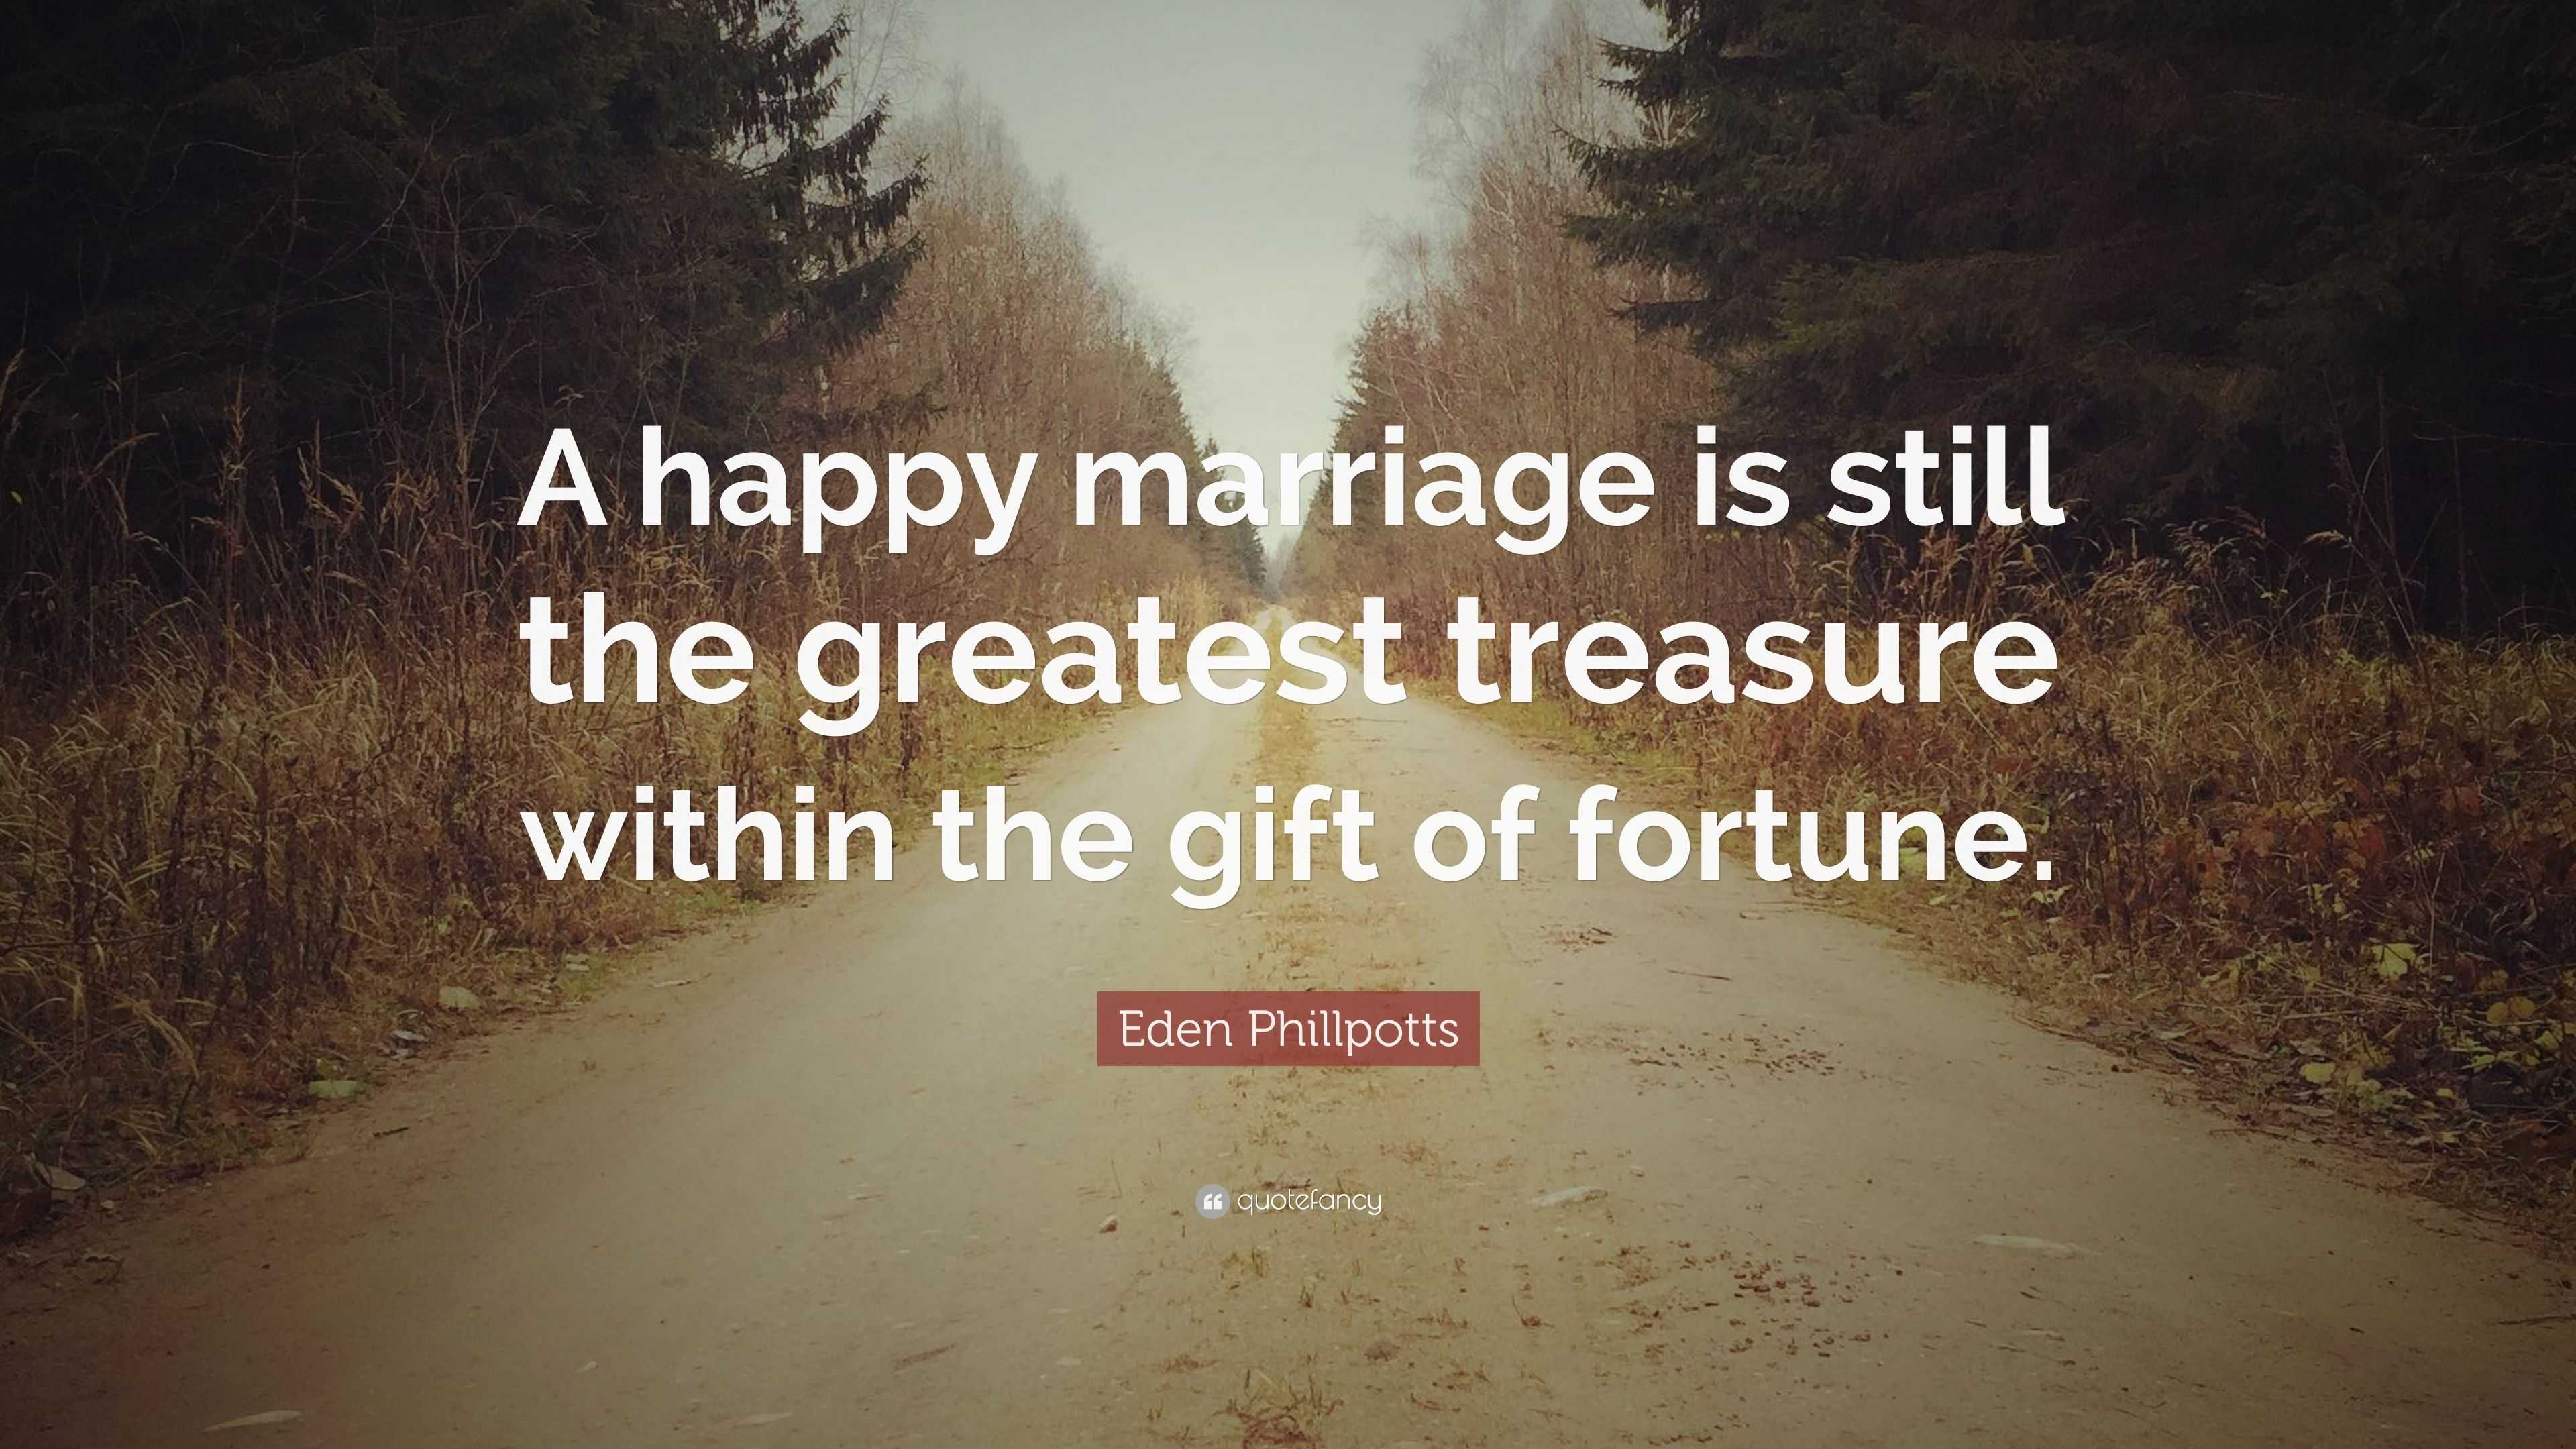 26 Heartfelt Marriage Quotes and Quotes About Raising a Family